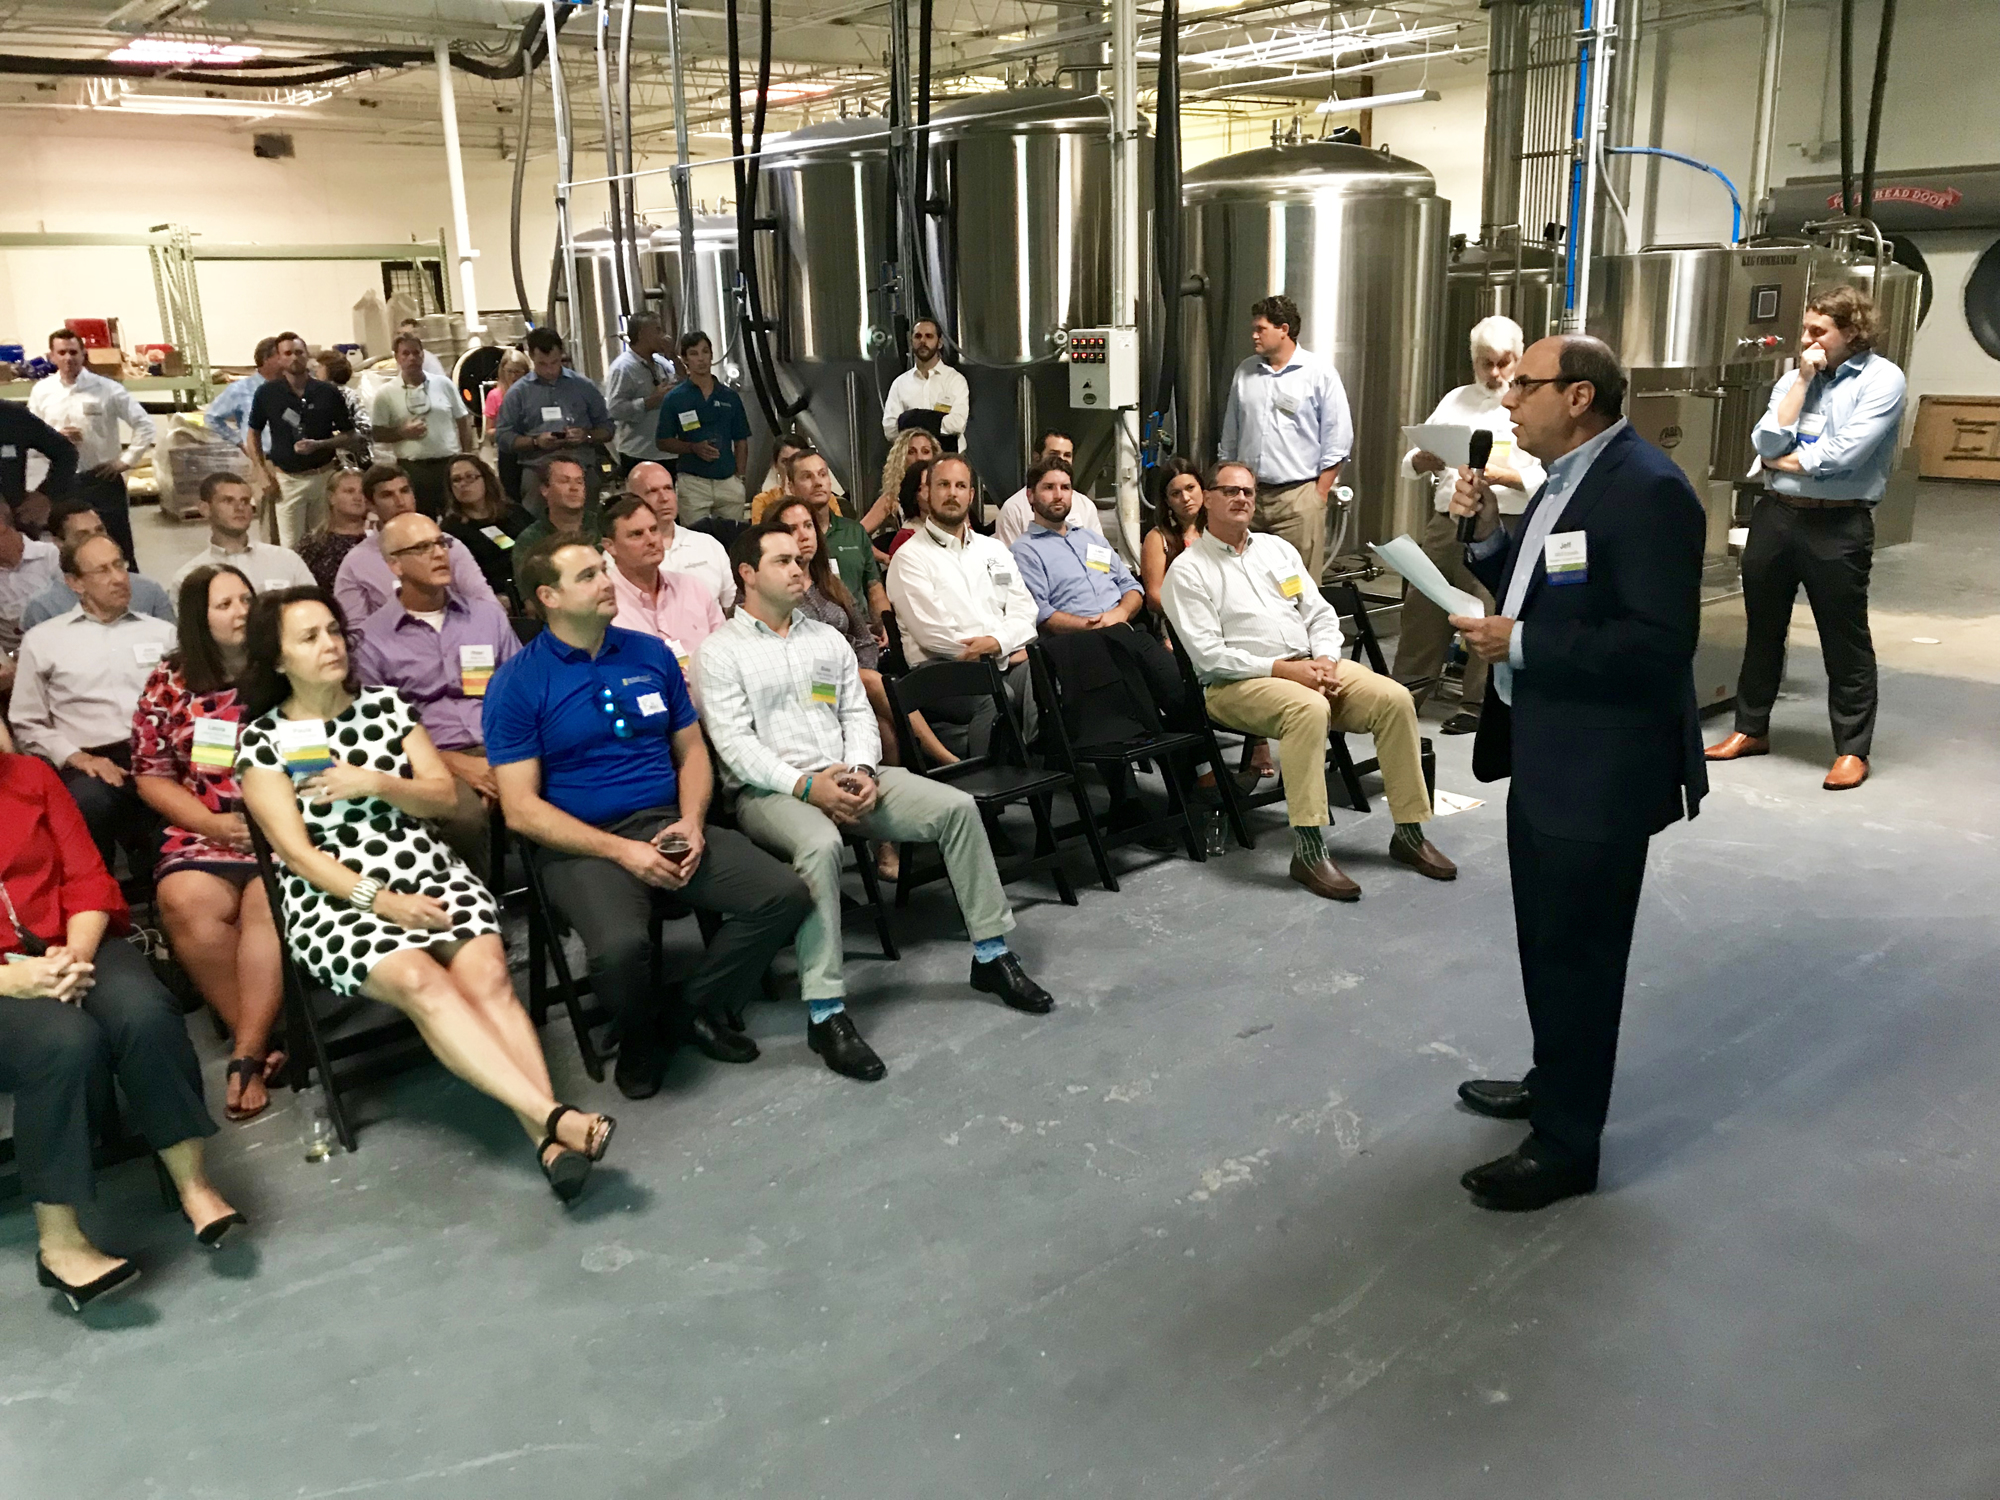 Jeff Edwards, right, shares details about the Rail Yard District Business Council during a meeting of the Urban Land Institute at Tabula Rasa Brewing, a new business that had its grand opening Sept. 14.